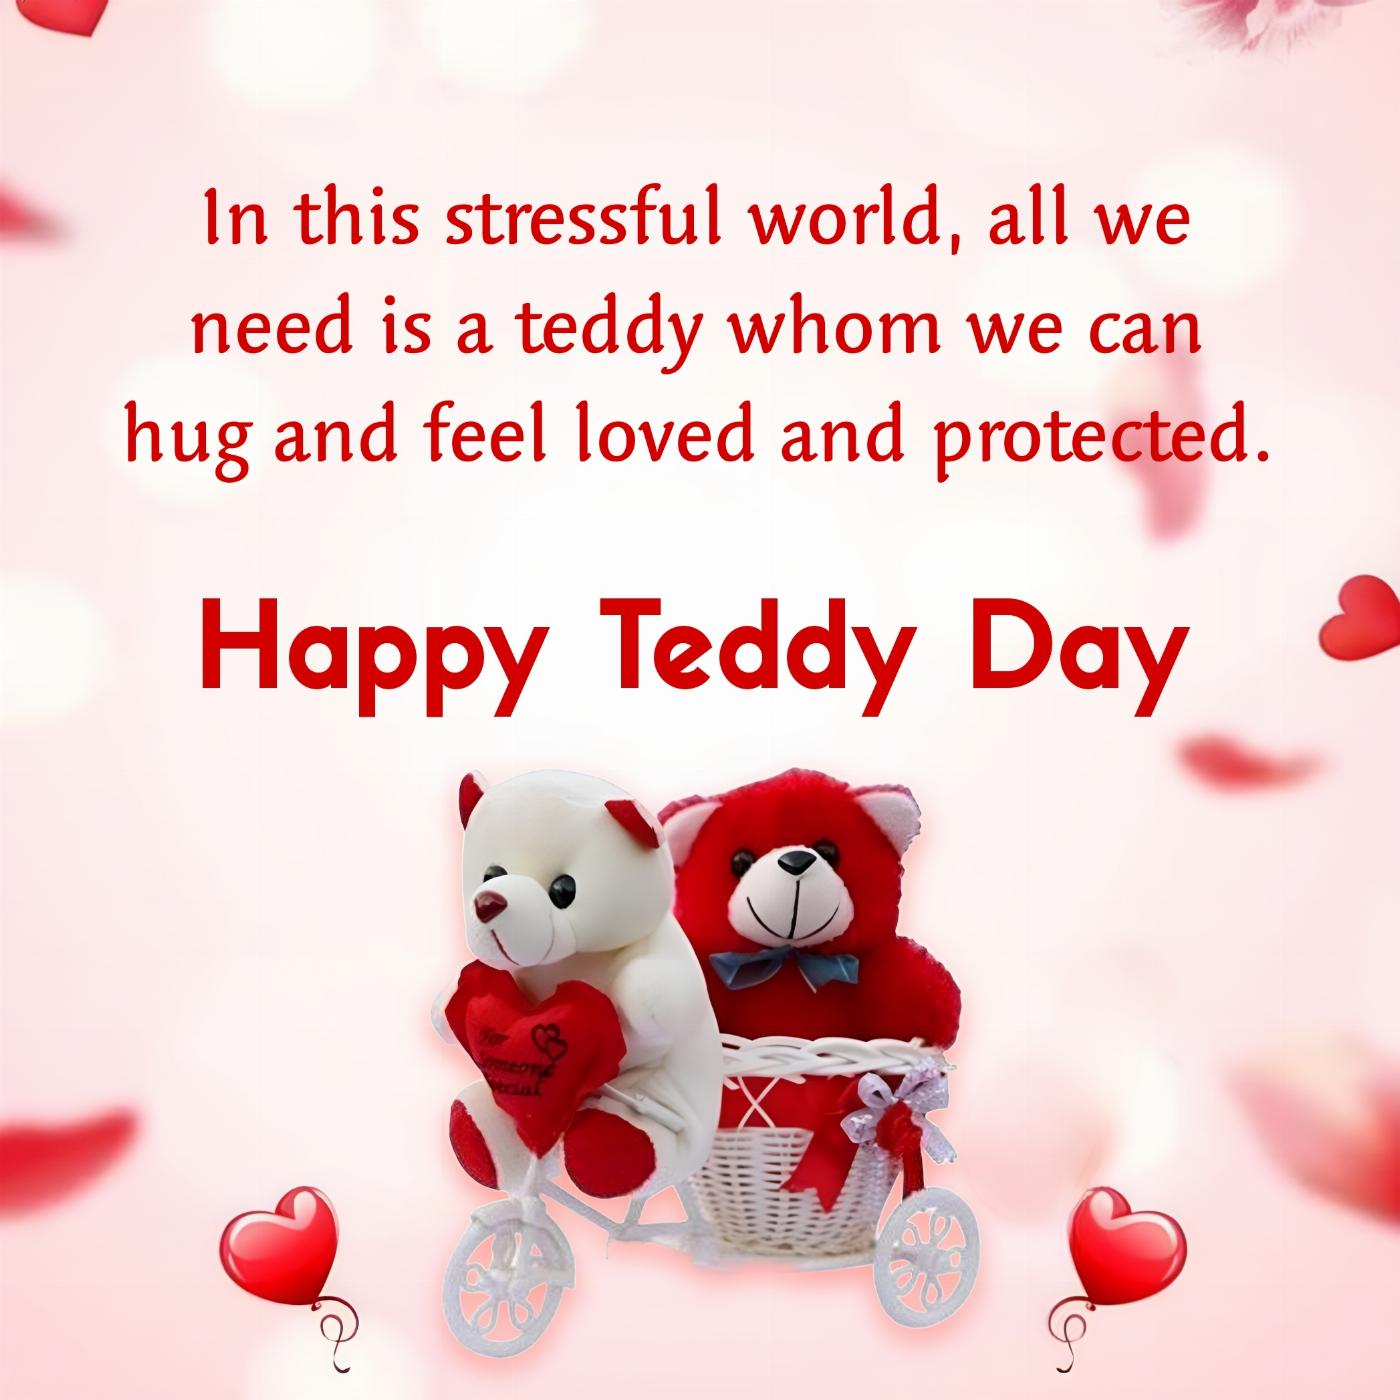 In this stressful world all we need is a teddy